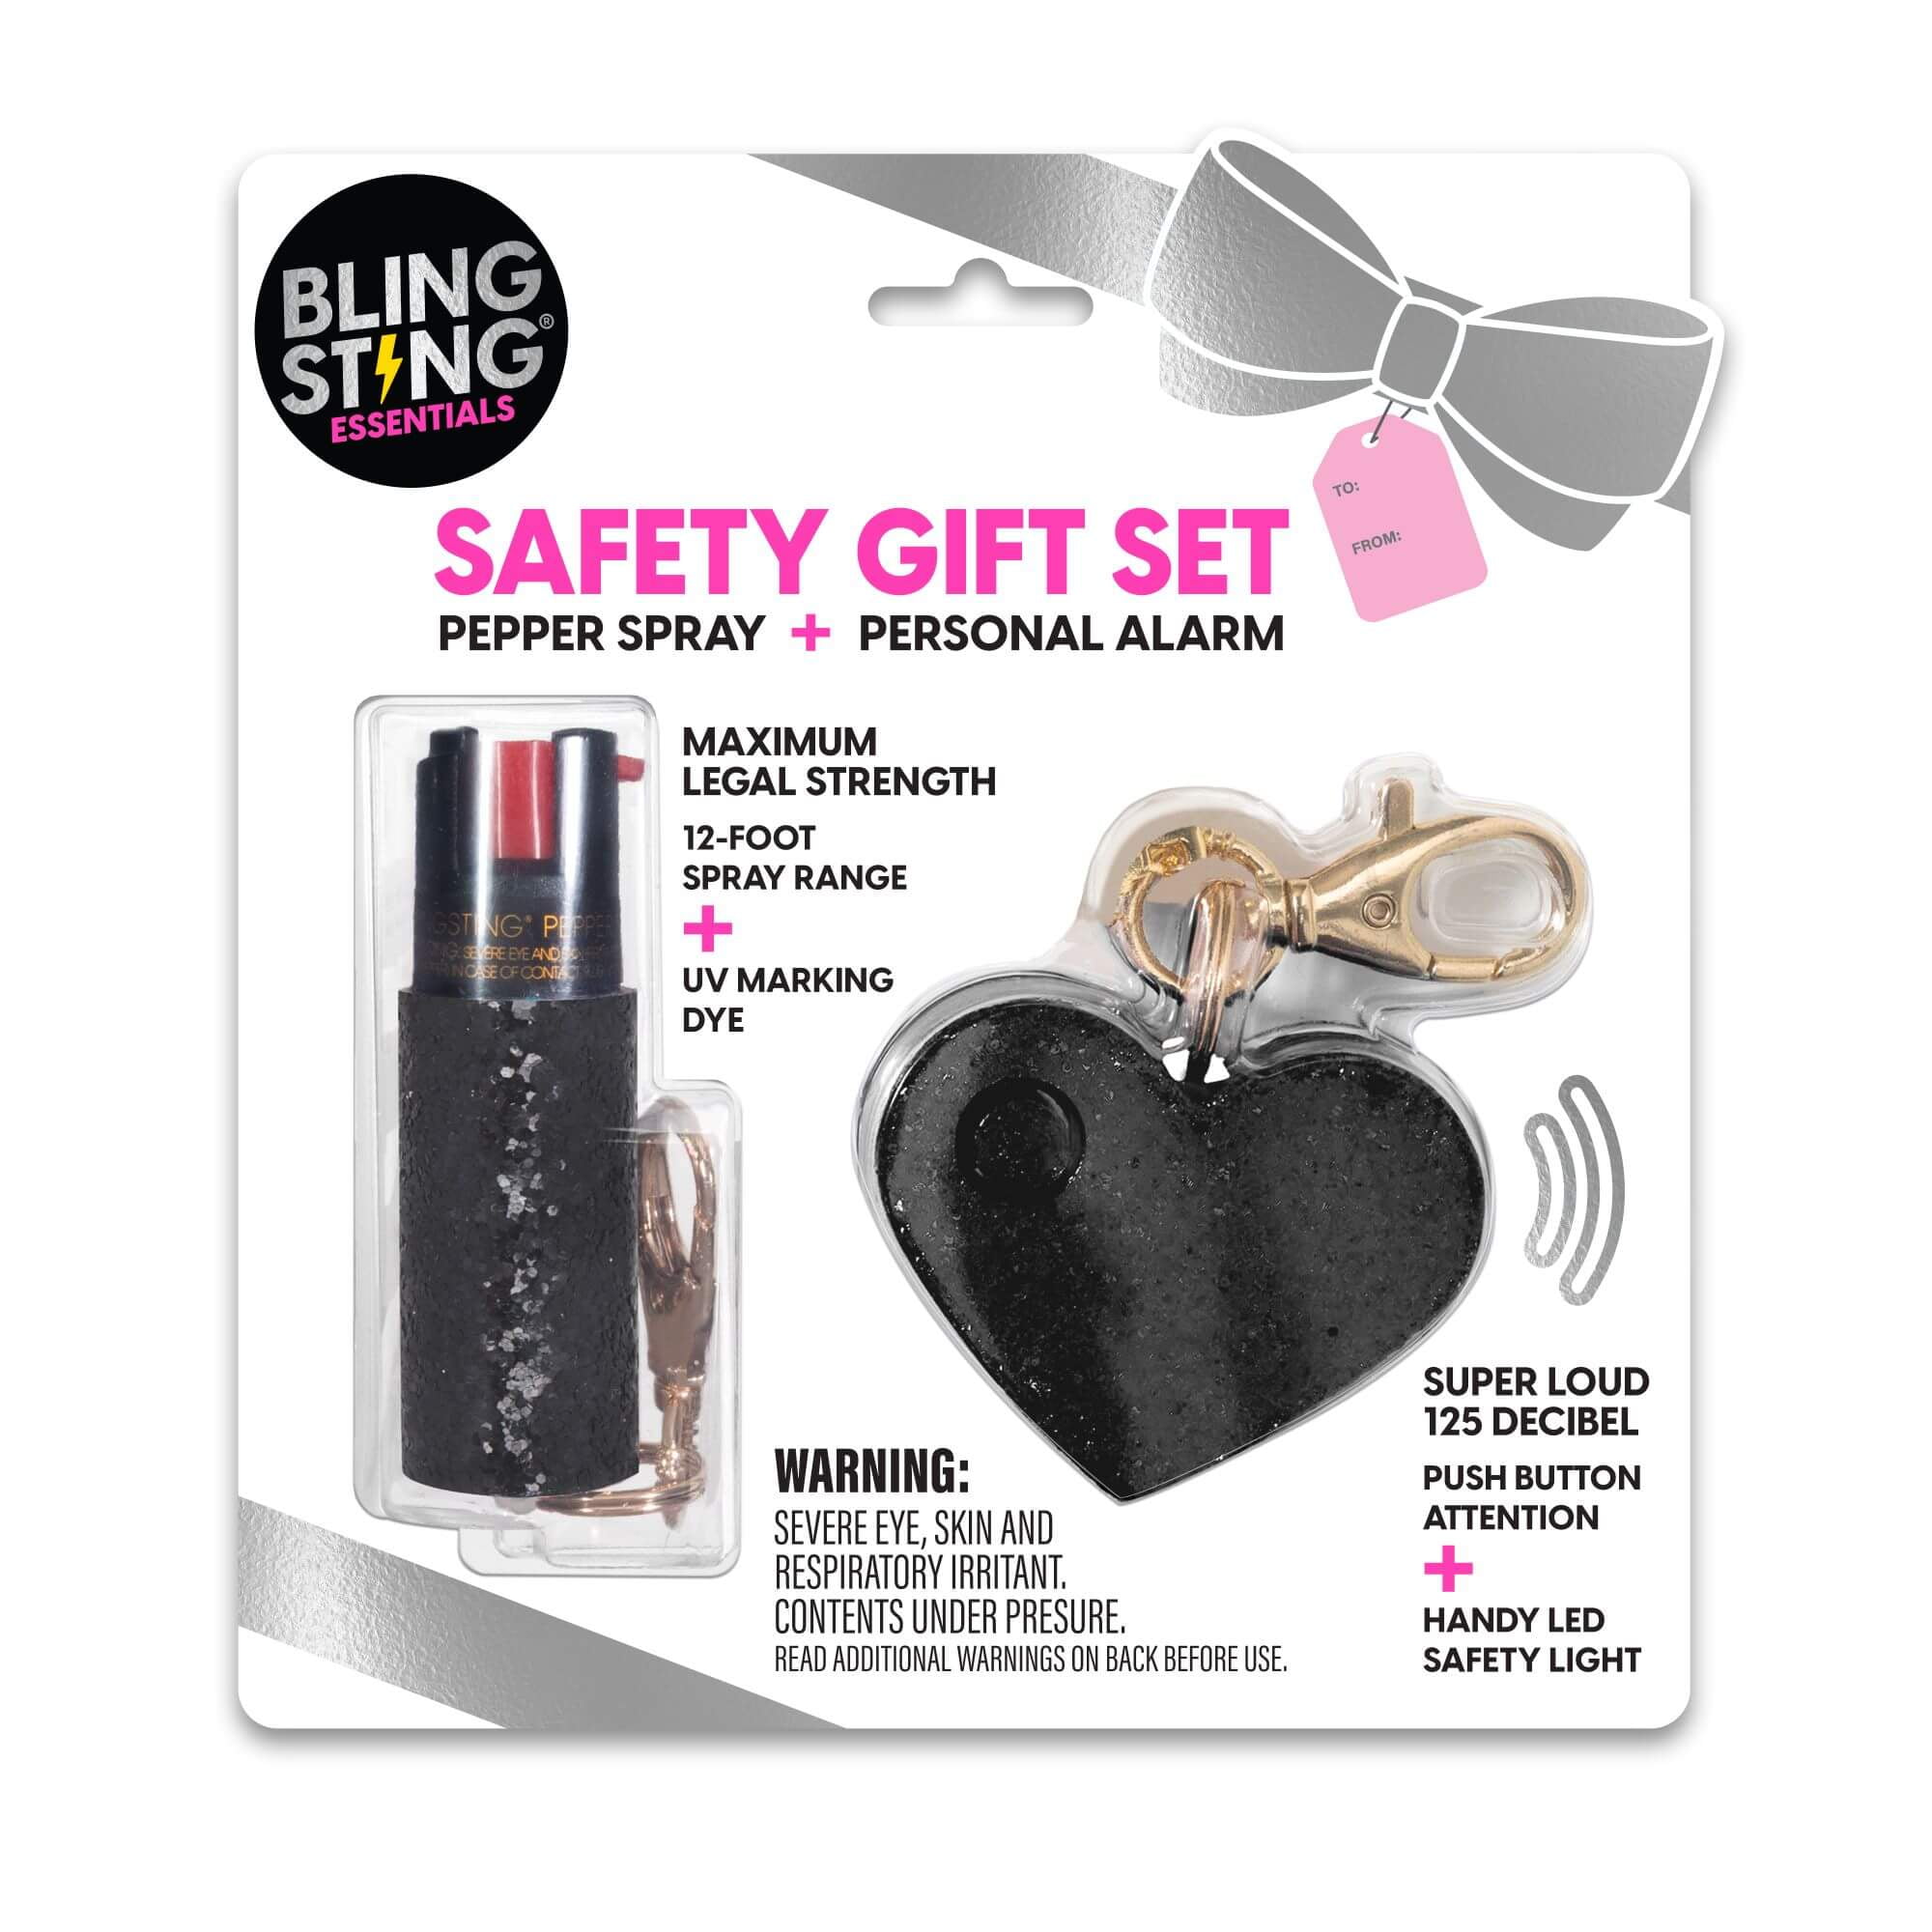 BLINGSTING Essentials Personal Gift Set with Pepper Spray & Safety